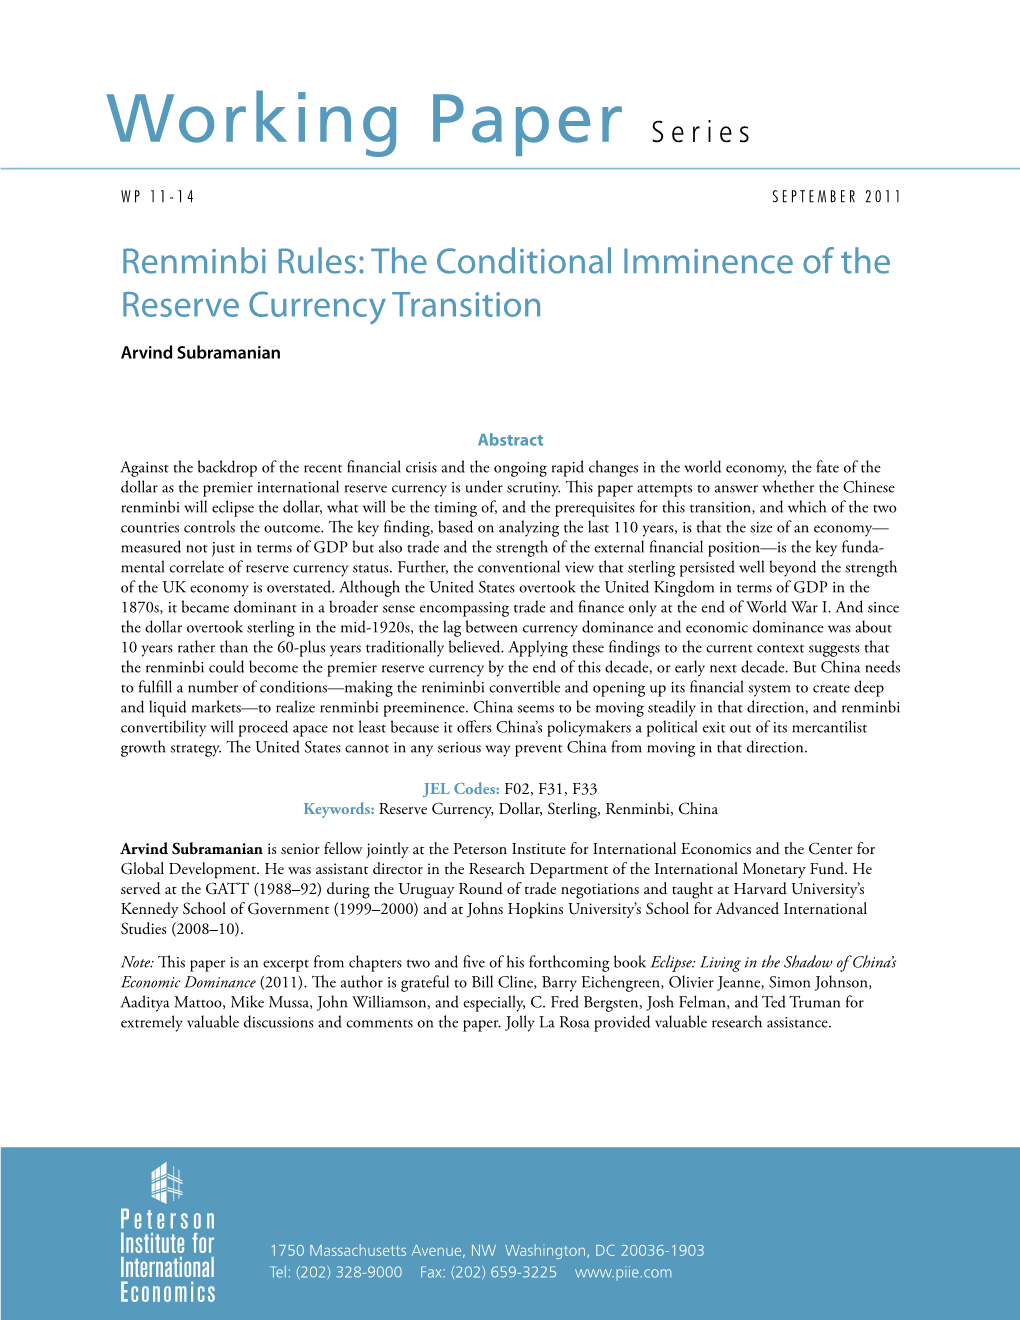 Renminbi Rules: the Conditional Imminence of the Reserve Currency Transition